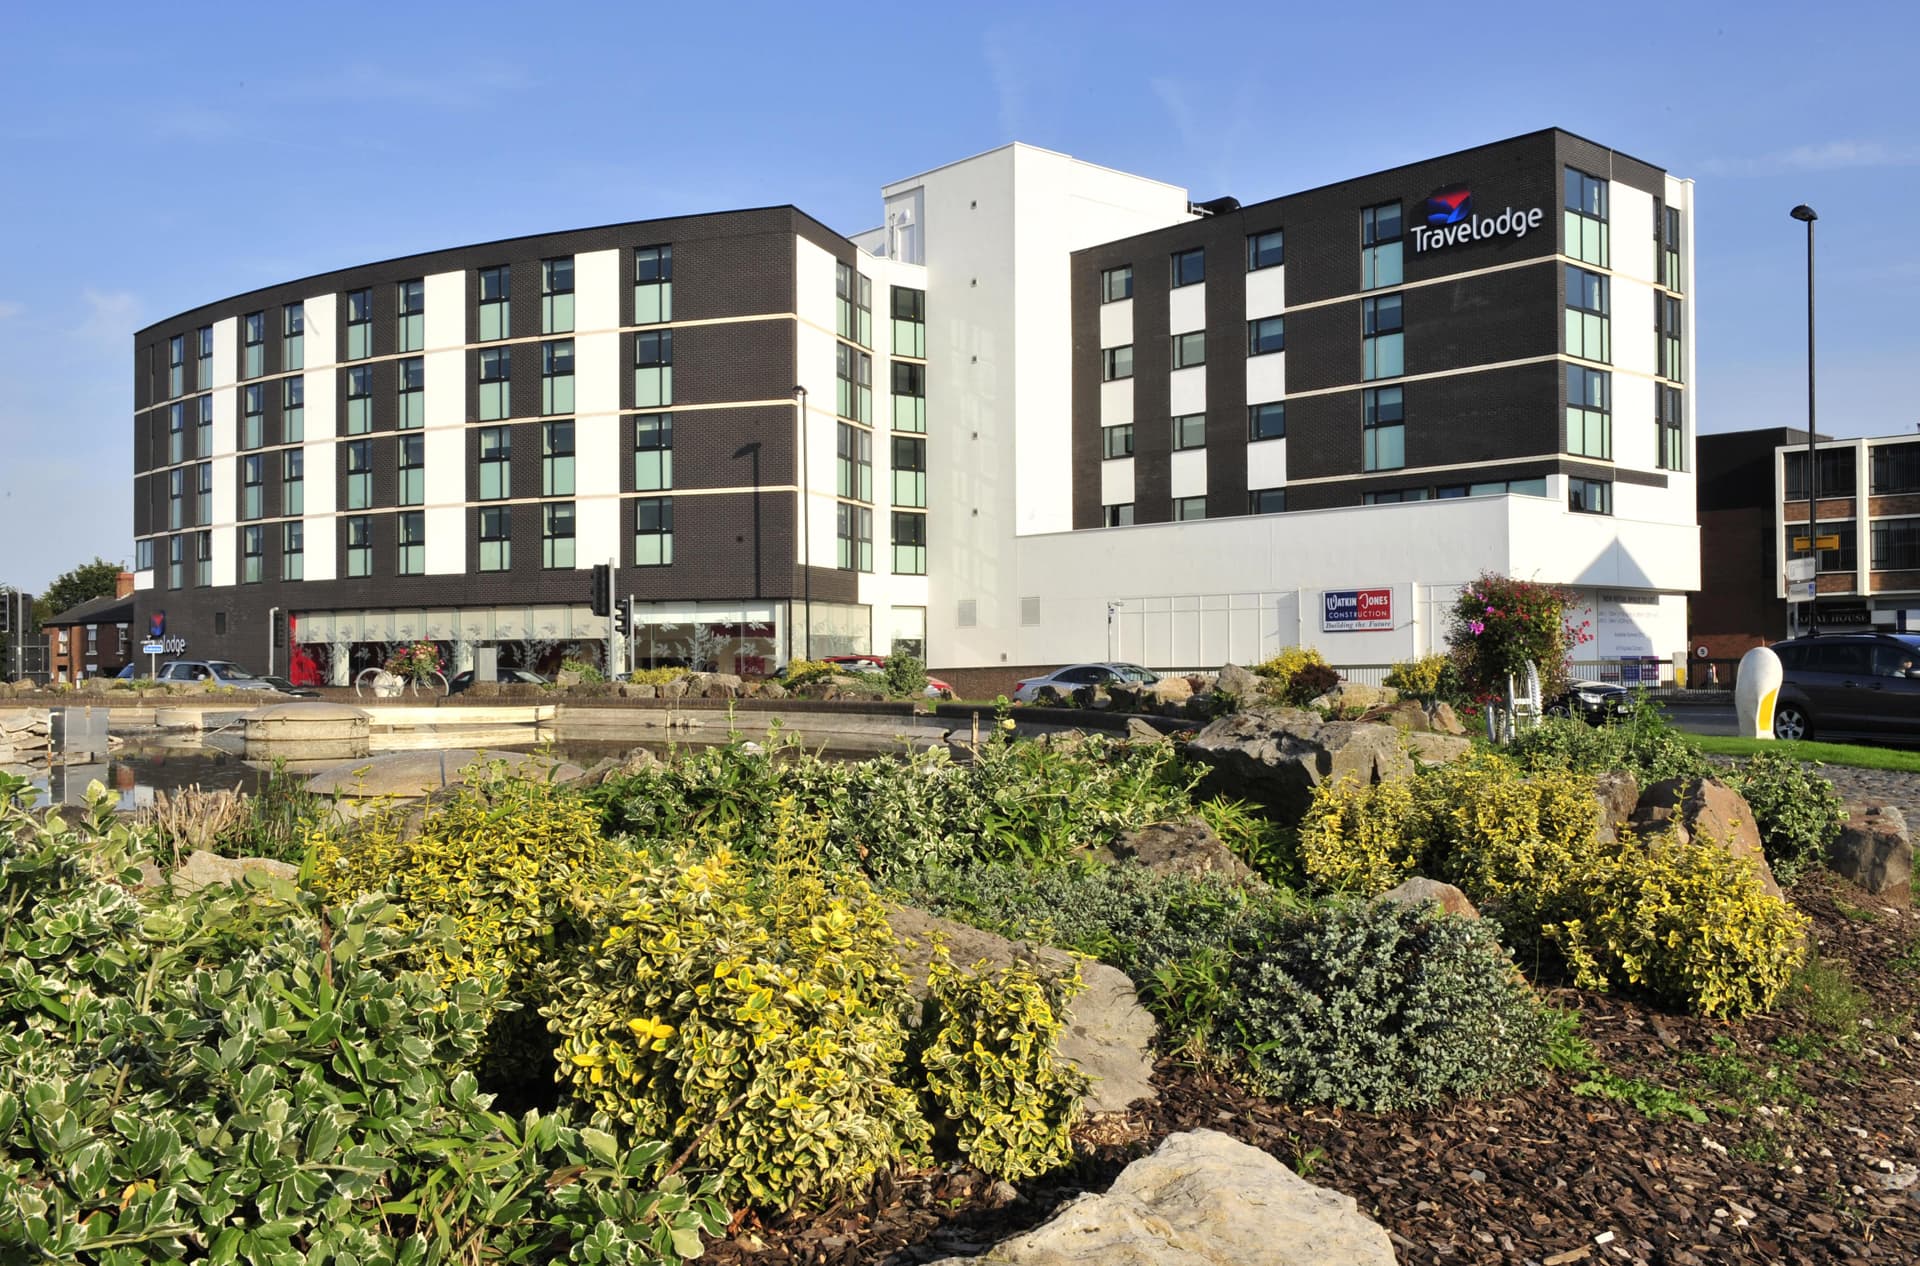 Large Travelodge hotel with rocks and green foliage in the foreground.